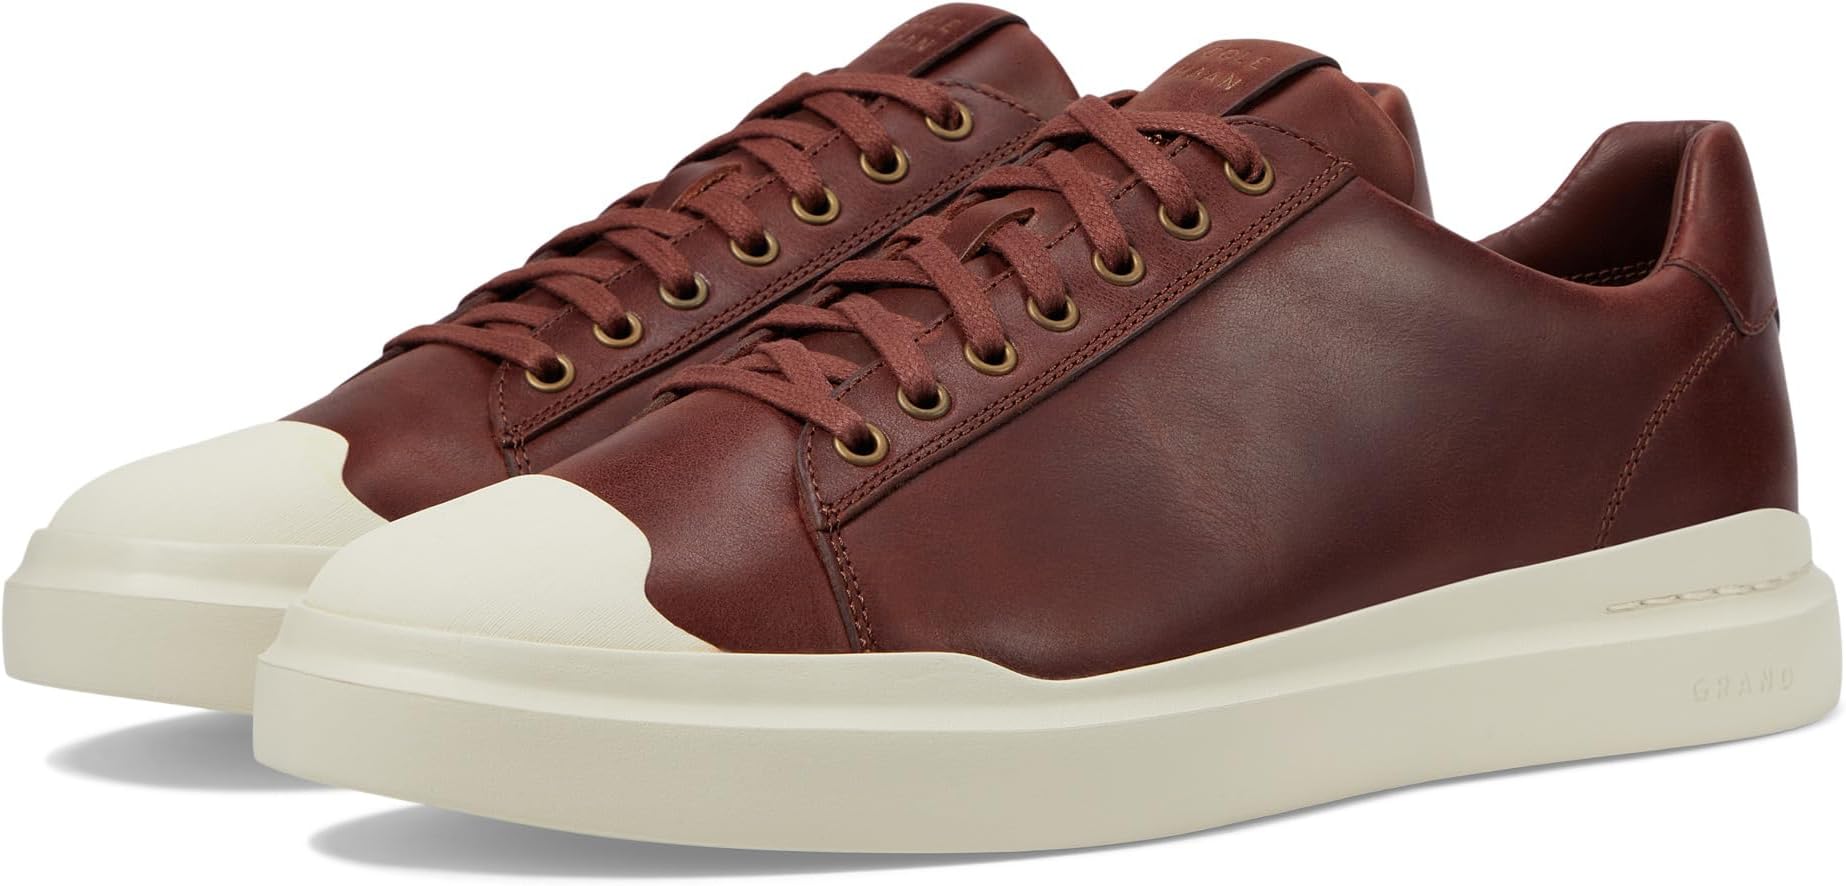 colin scot colin scot remastered expanded edition Кроссовки Grandpro Rally Cap Toe Sneaker Cole Haan, цвет Scot Leather/Birch